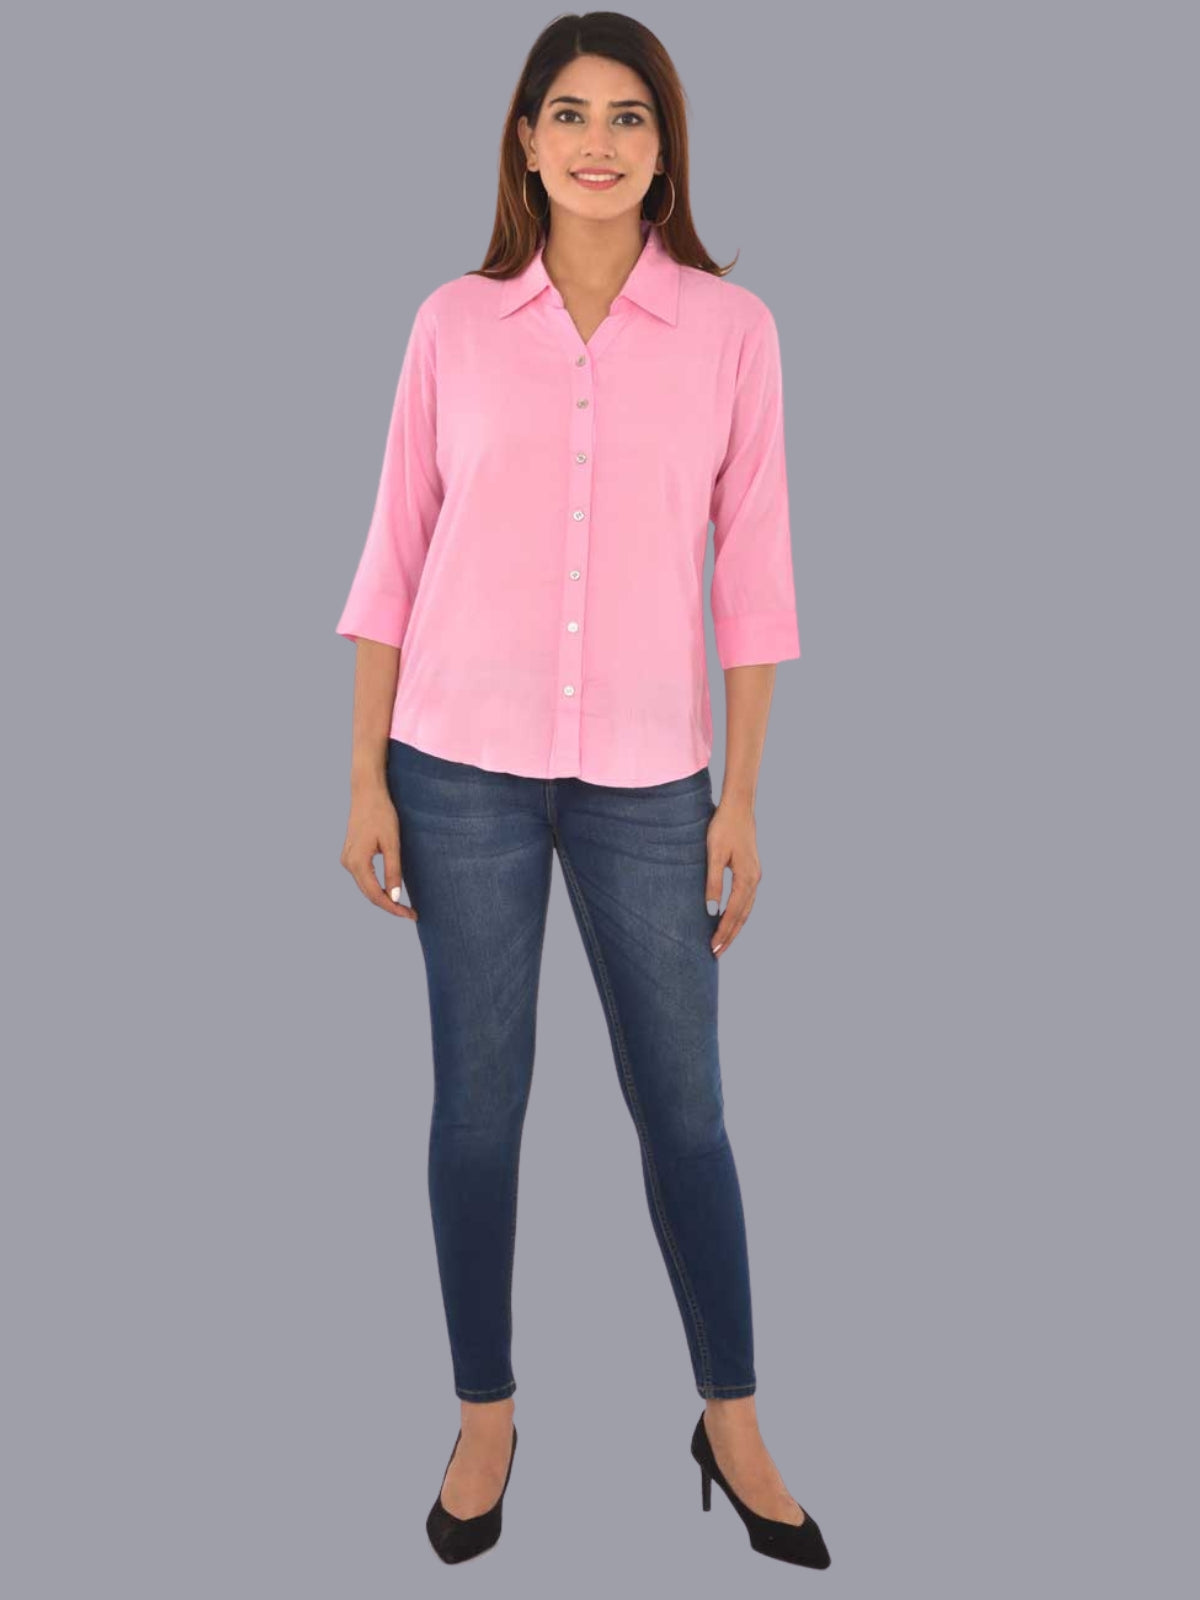 Womens Solid Pink Regular Fit Spread Collar Rayon Shirt